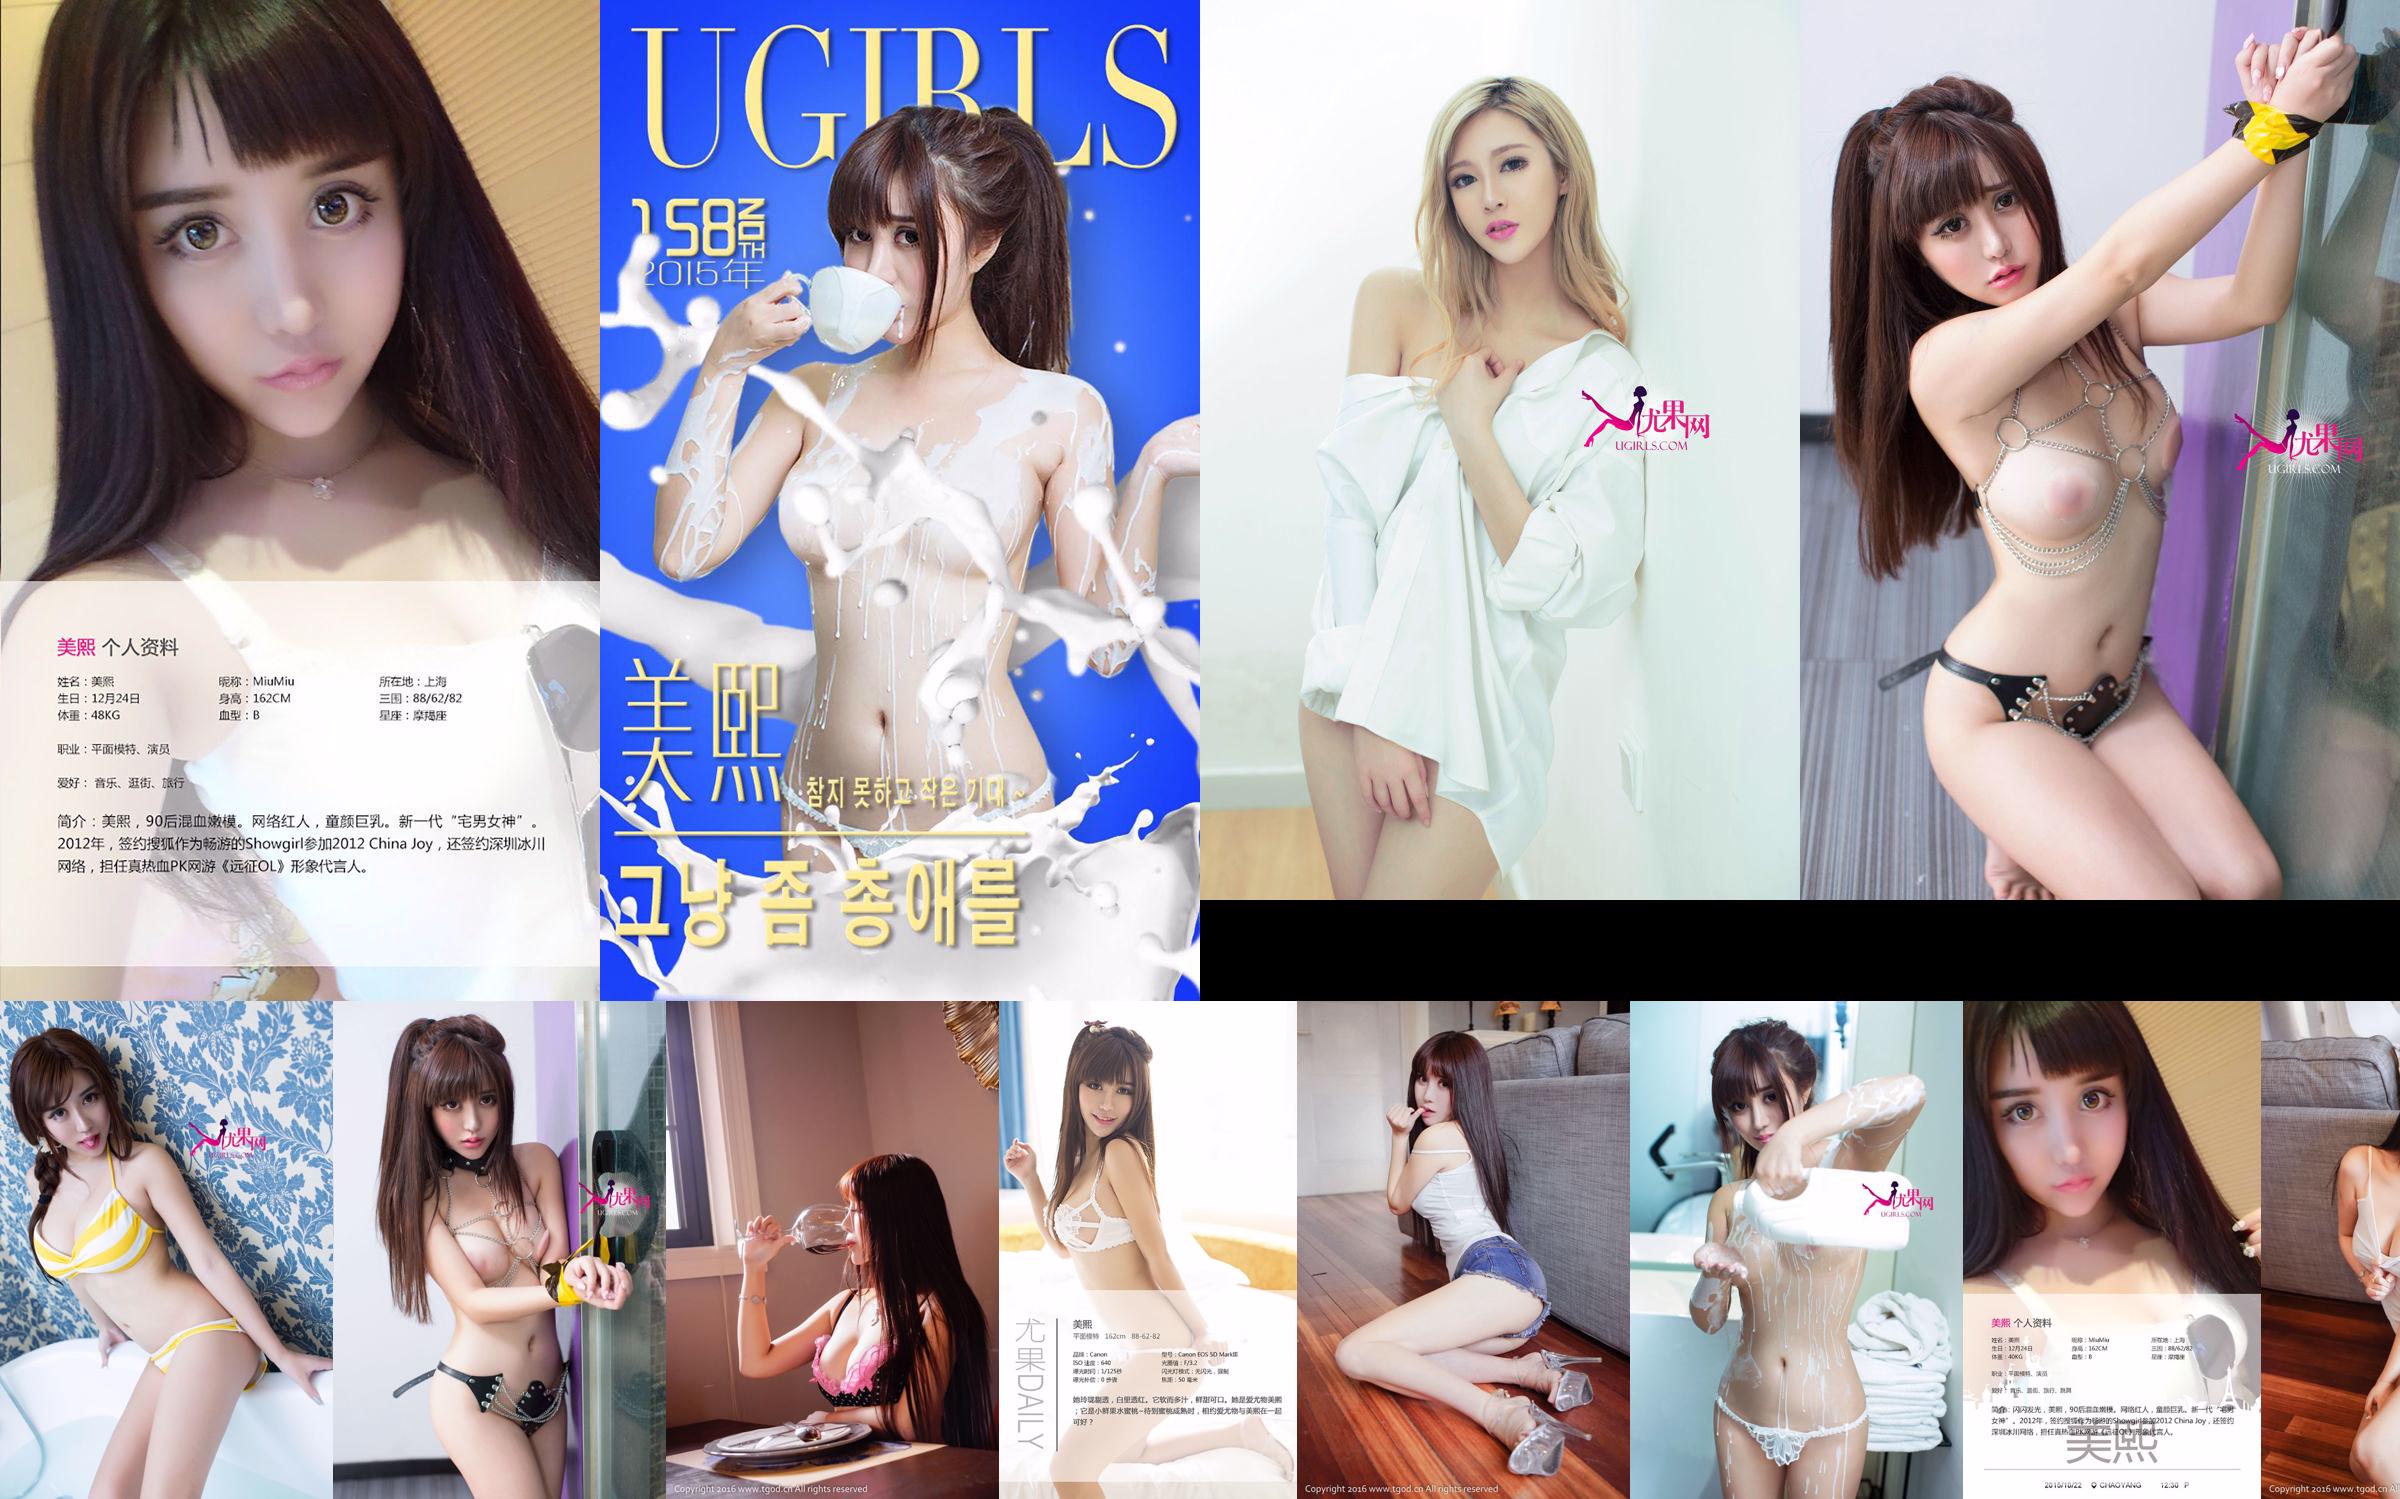 Miu Miu "The Little Expectation That Can't Be Held" [Love Youwu Ugirls] No.158 No.4f0c81 Page 4